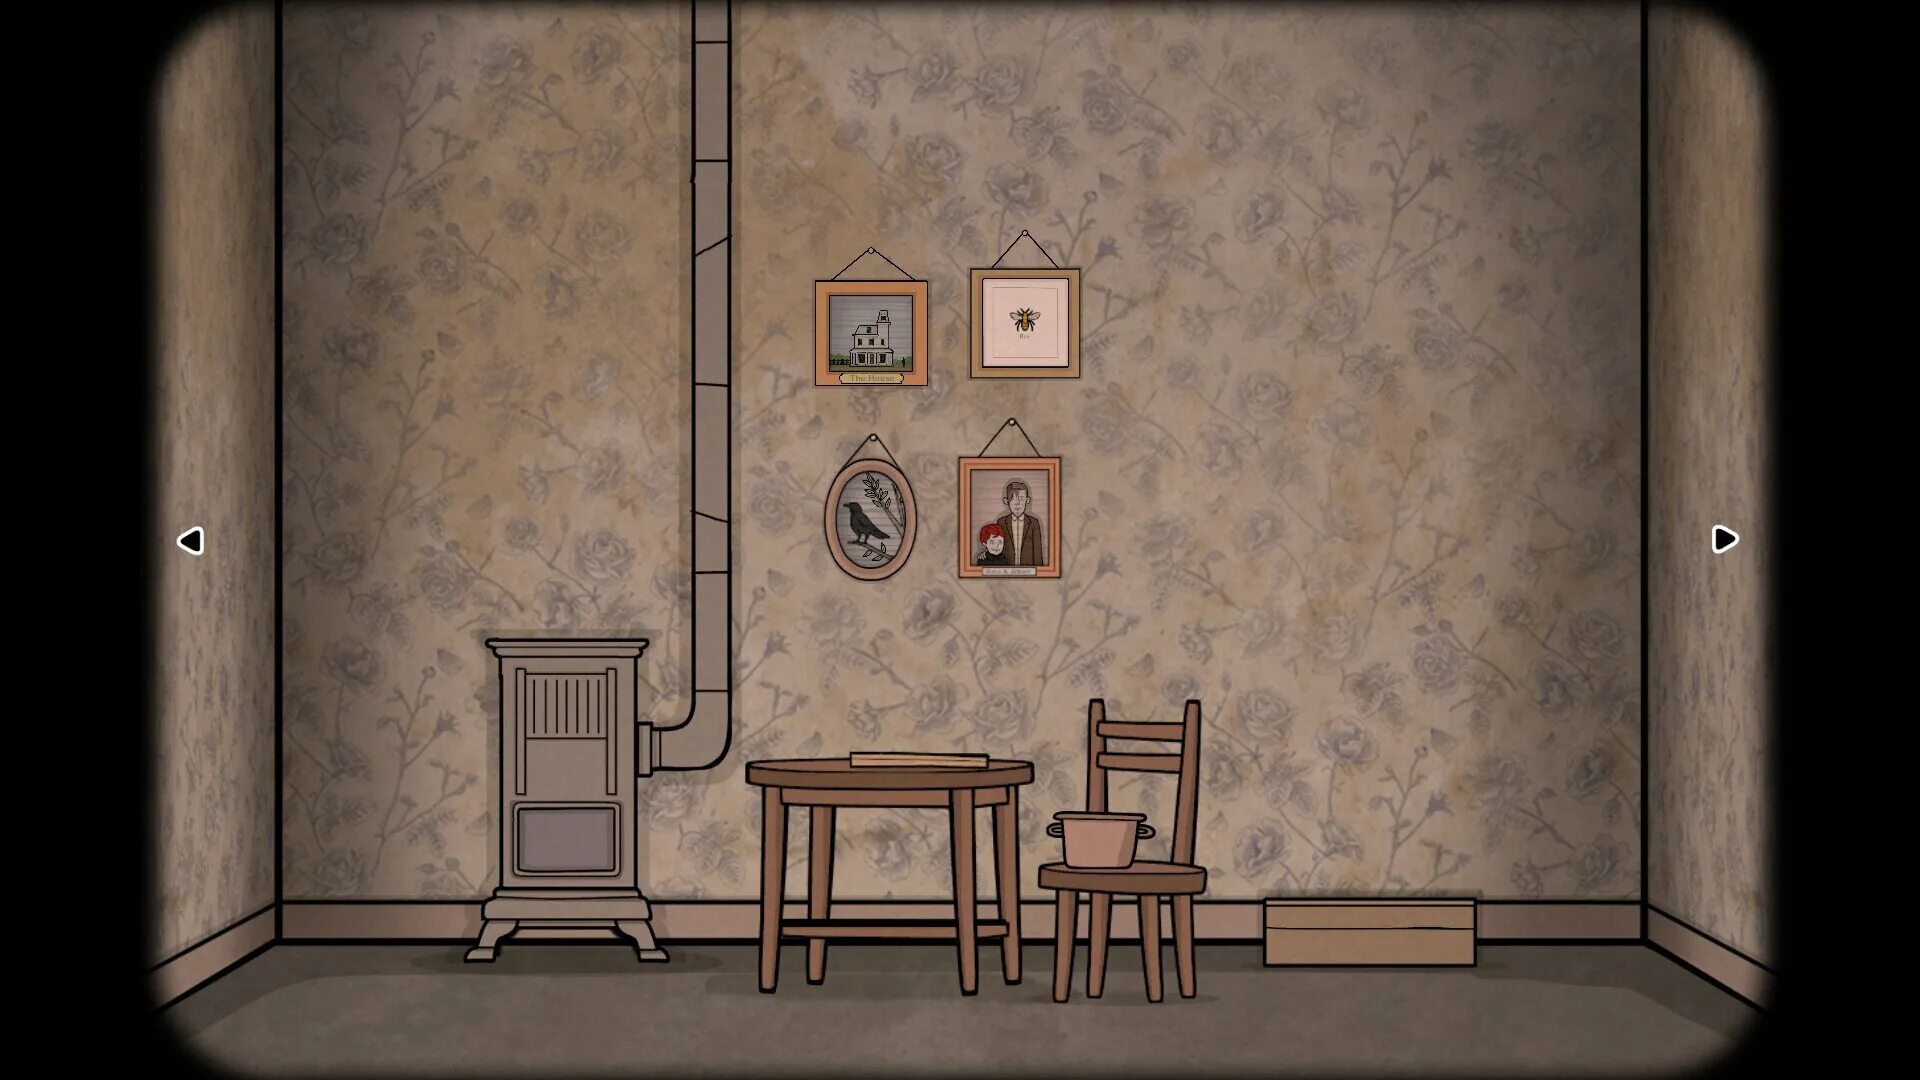 The past within на андроид. The past within Rusty Lake. Игра the past within. The past within |1| (Rusty Lake Coop). The past within 2.